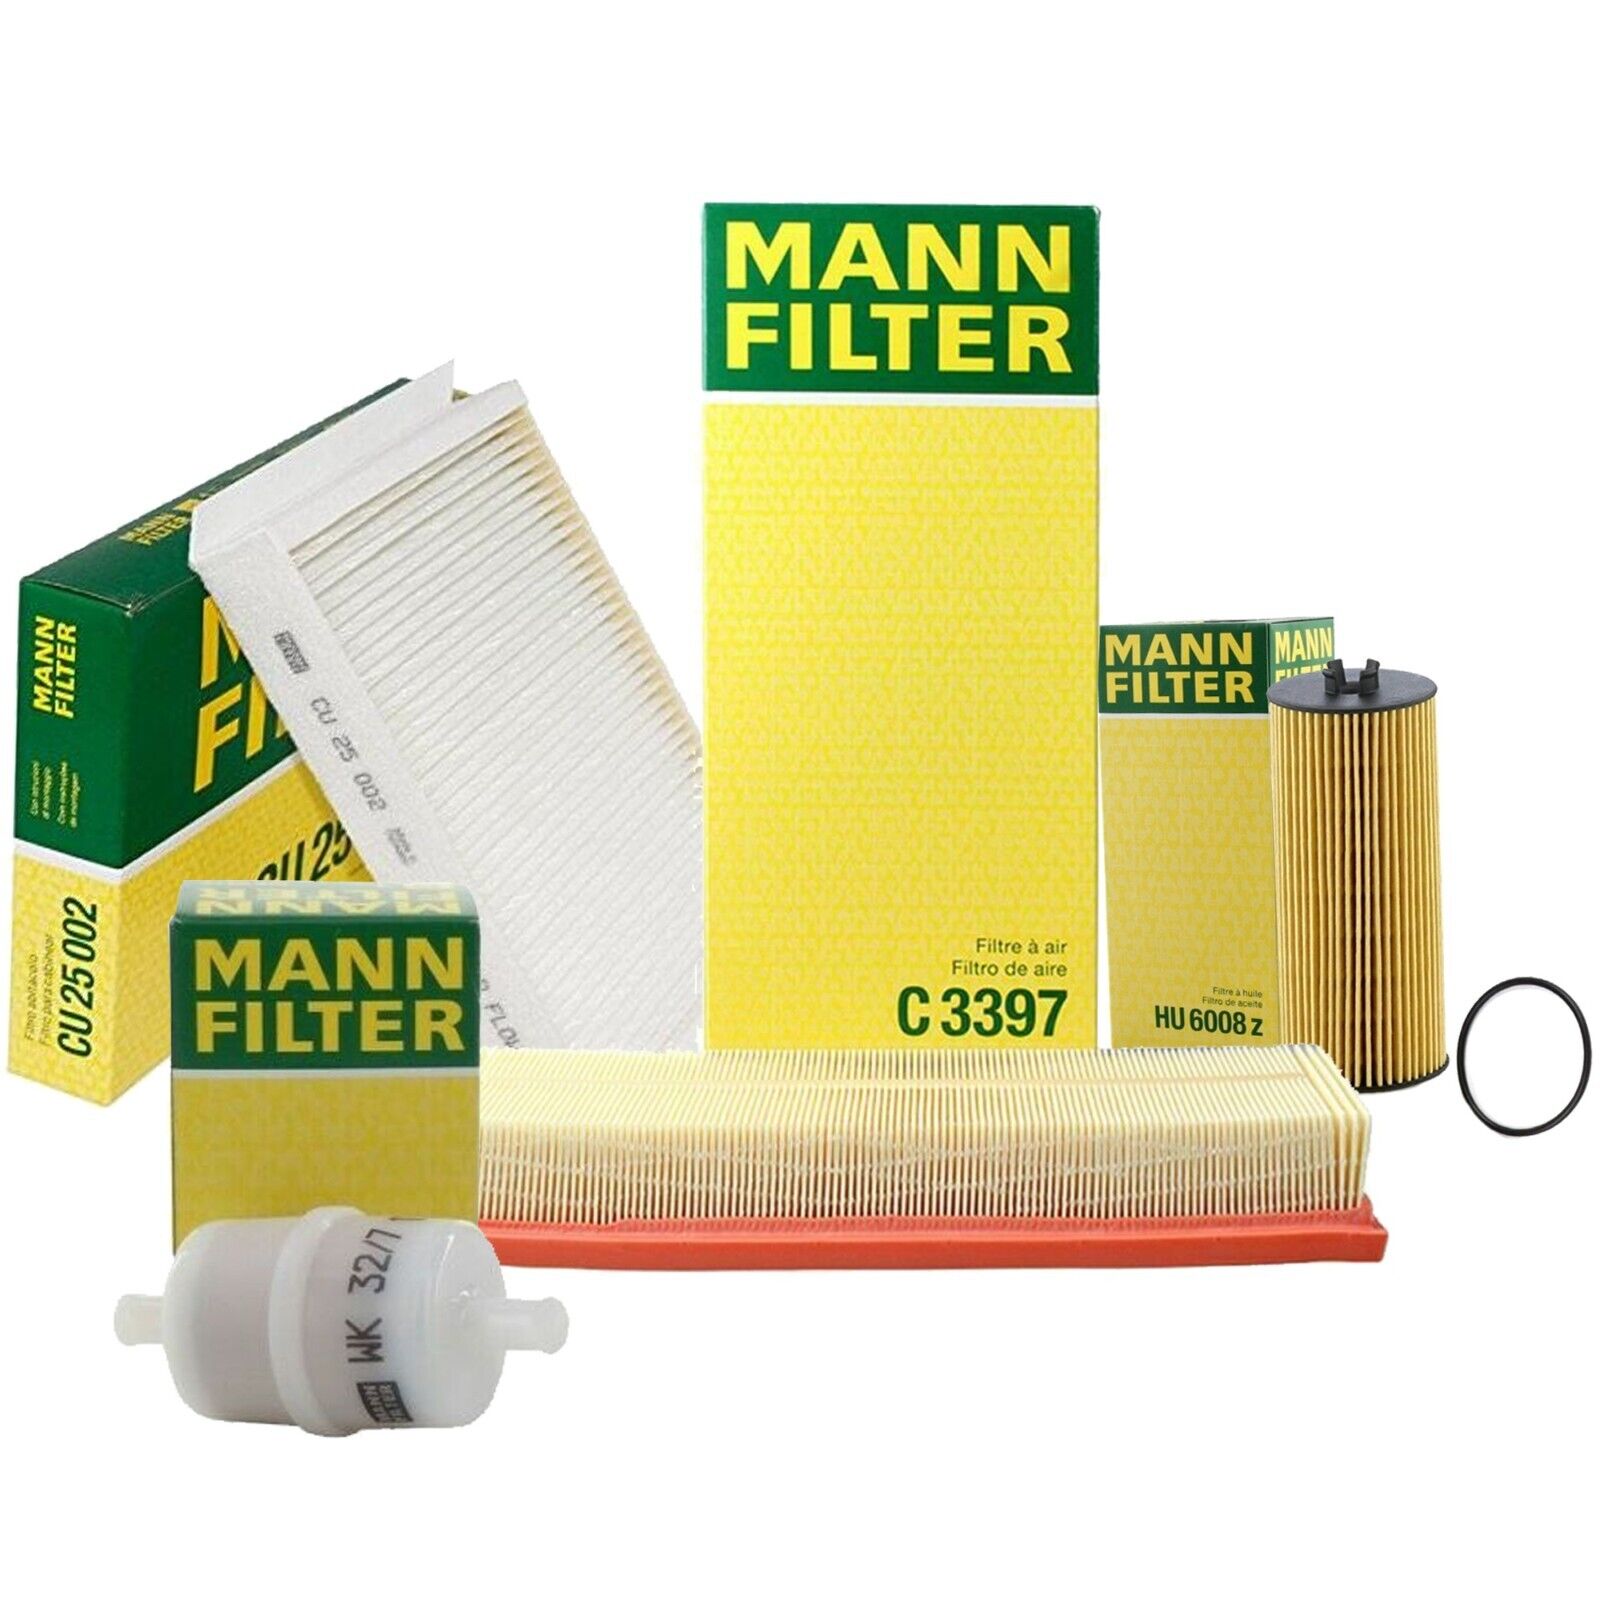 Mann Oil Air Paper Cabin Fuel Filter Service Kit For W166 X166 GL550 ML63 AMG